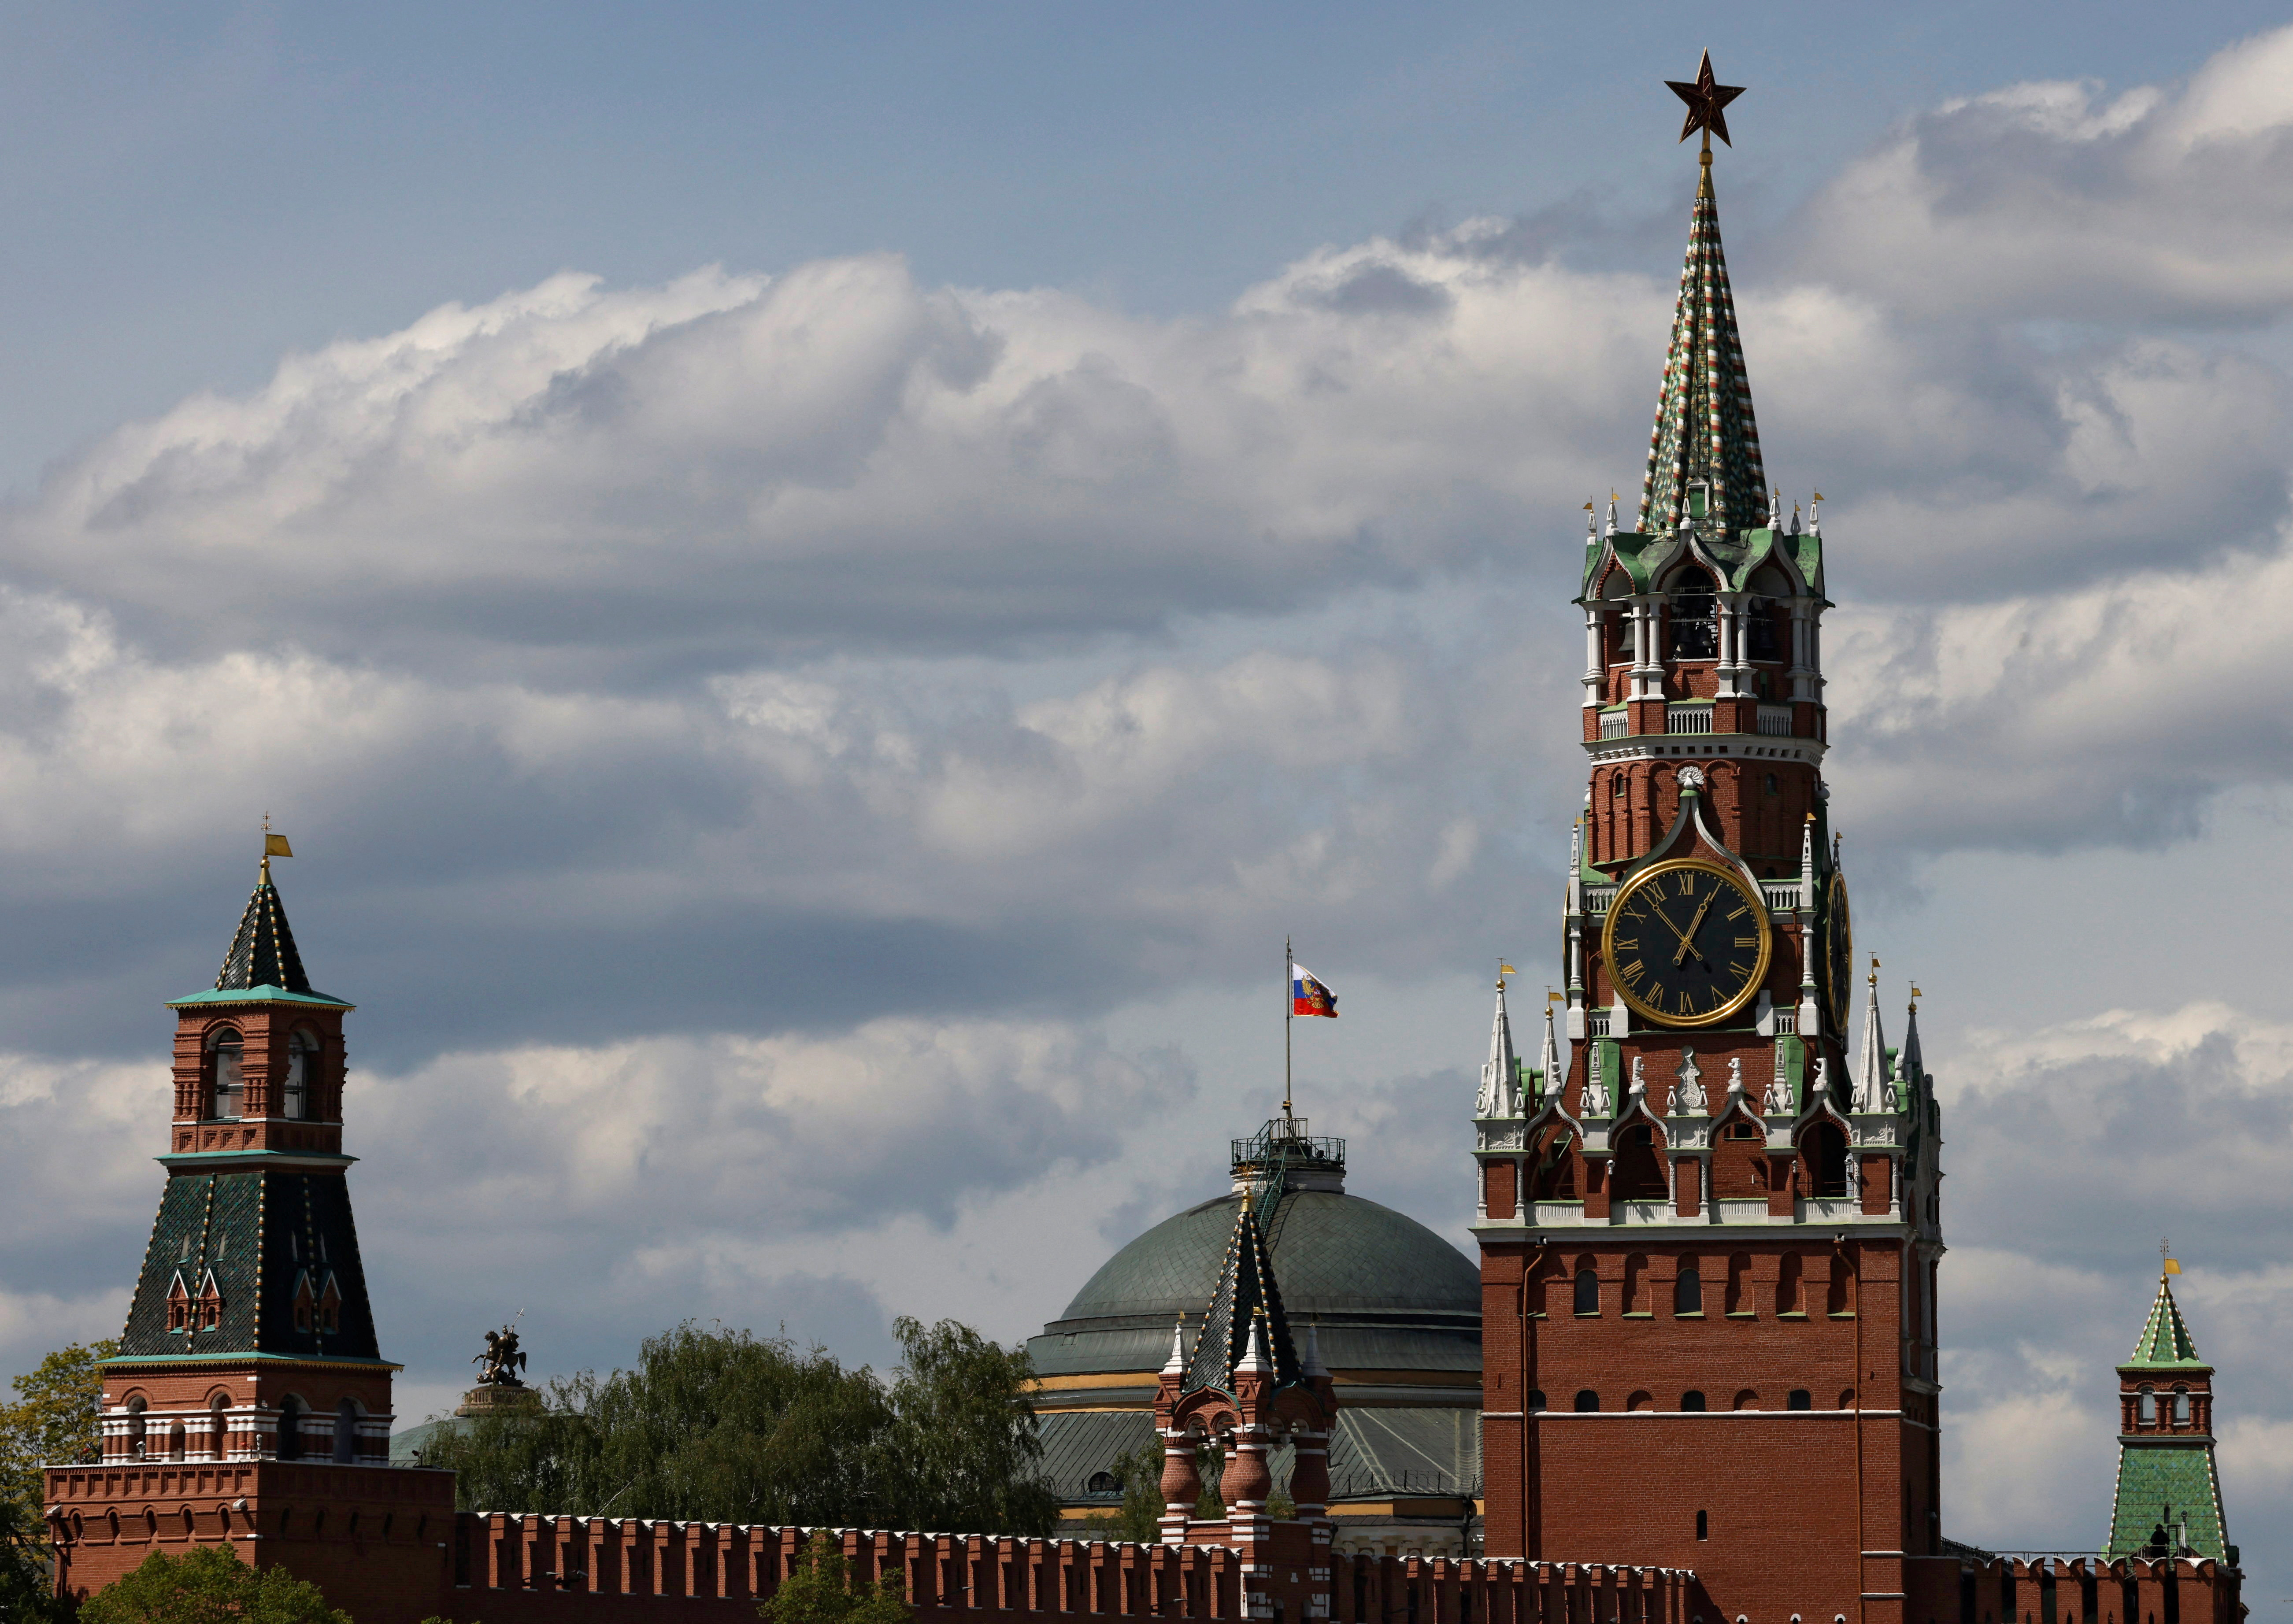 The Russian flag flies on the dome of the Kremlin Senate building in Moscow